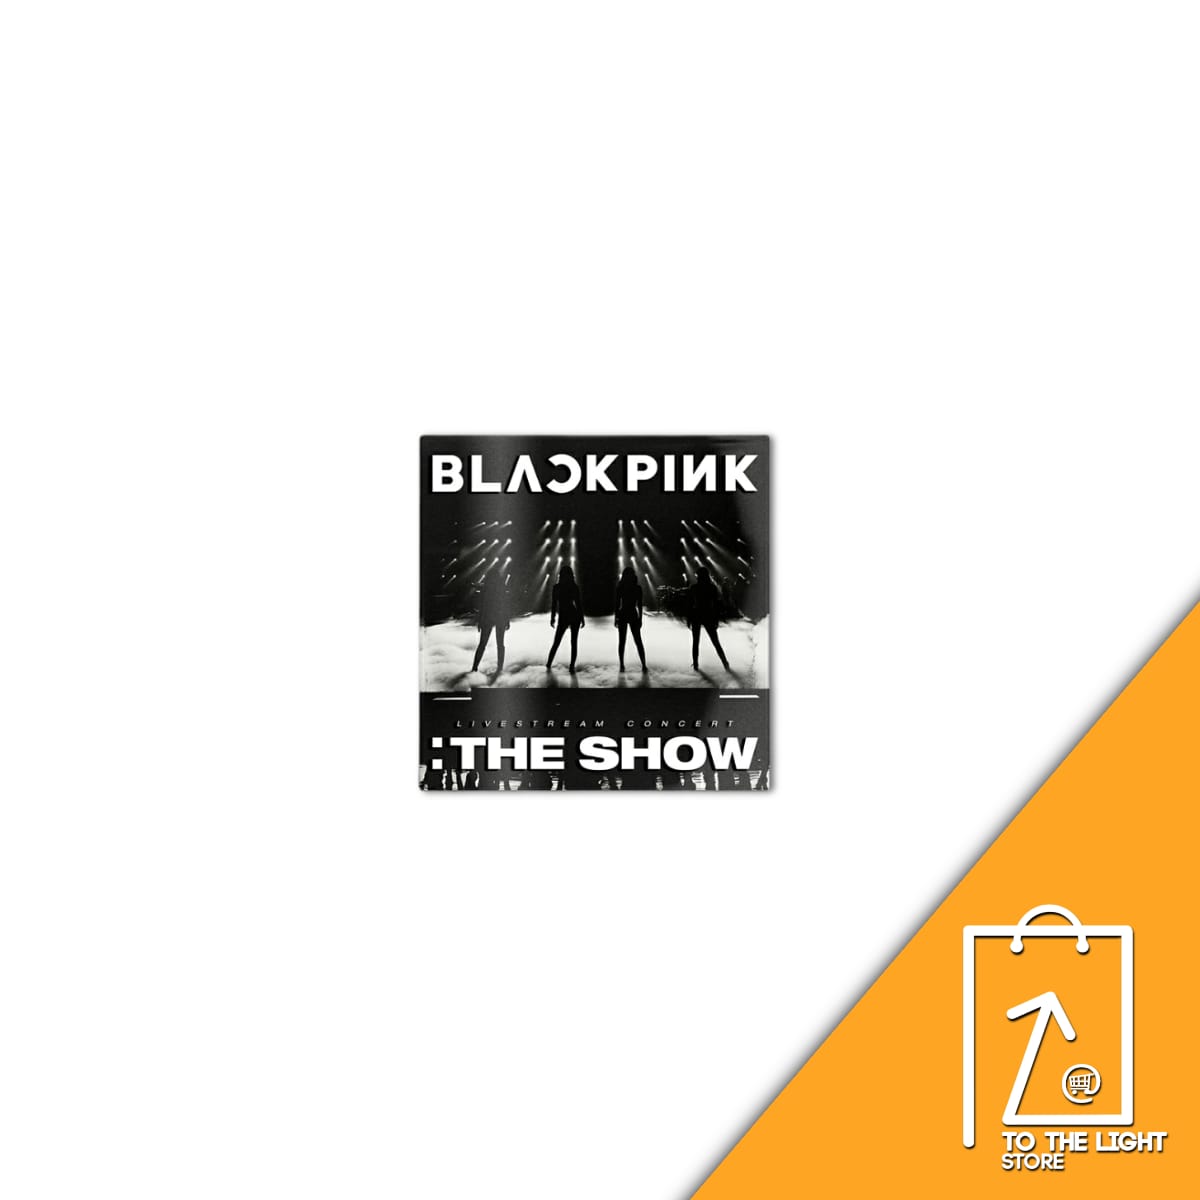 BLACKPINK 2021 THE SHOW Kit Video Benefit Gift